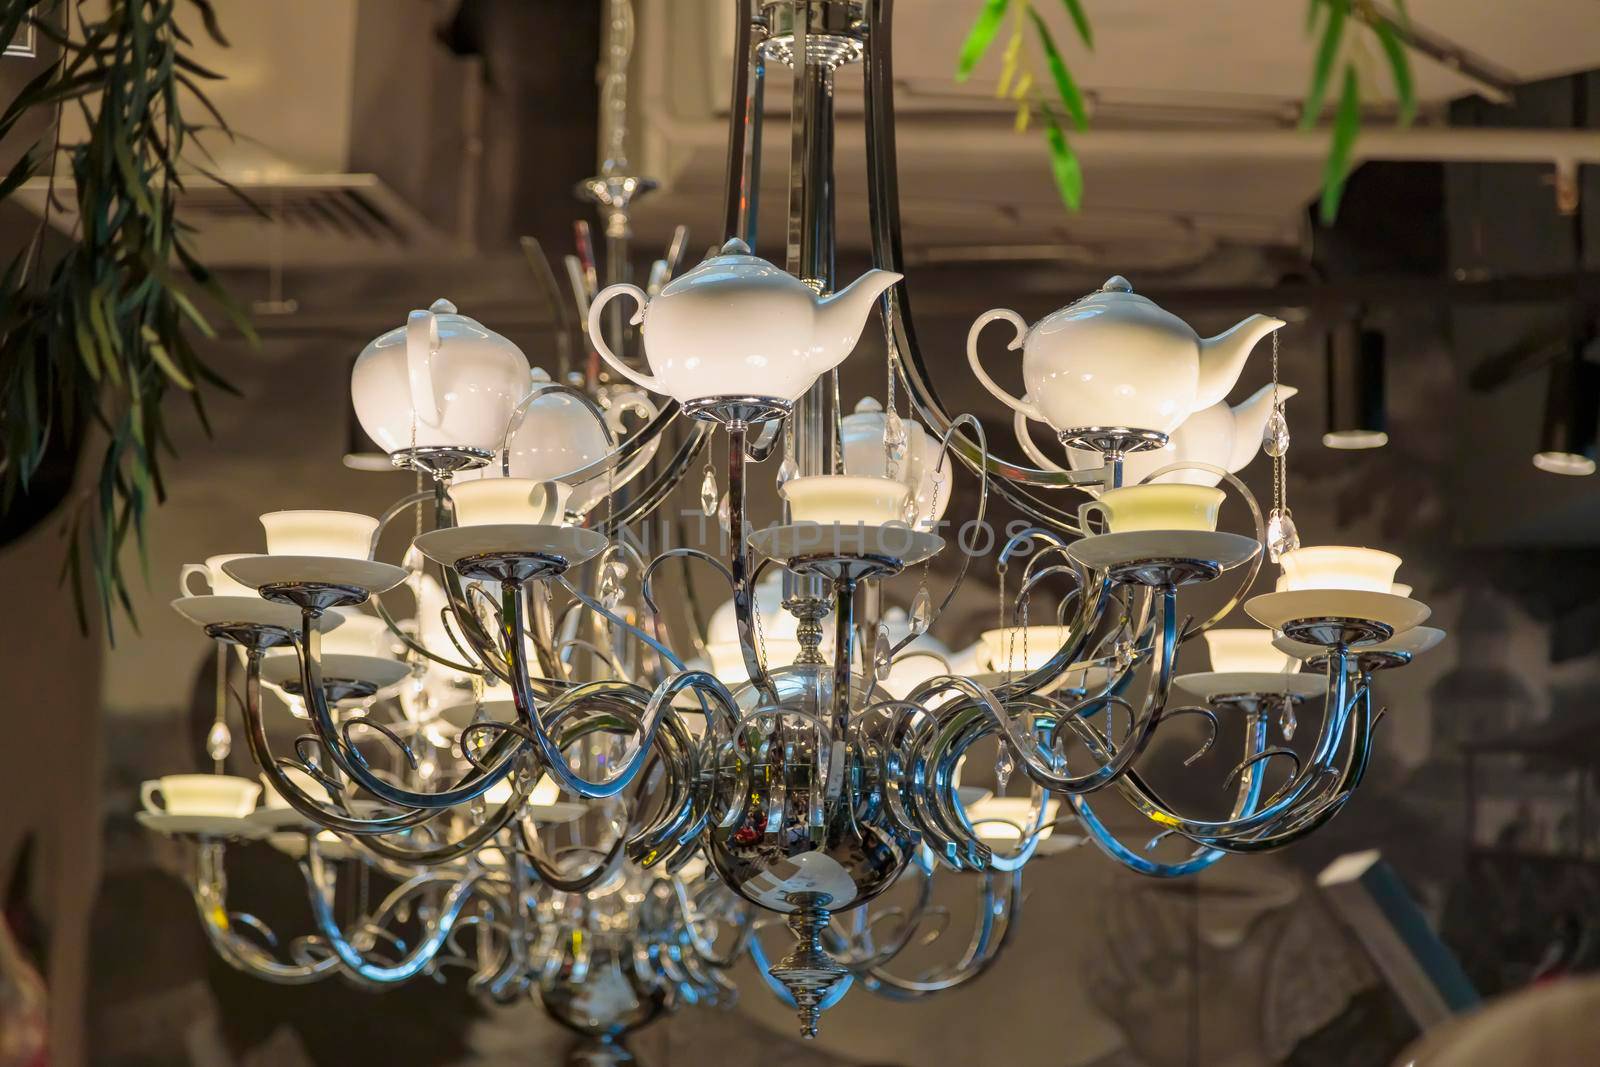 Luxurious large chandelier, lamps in the form of porcelain teapots and cups and saucers. by Yurich32